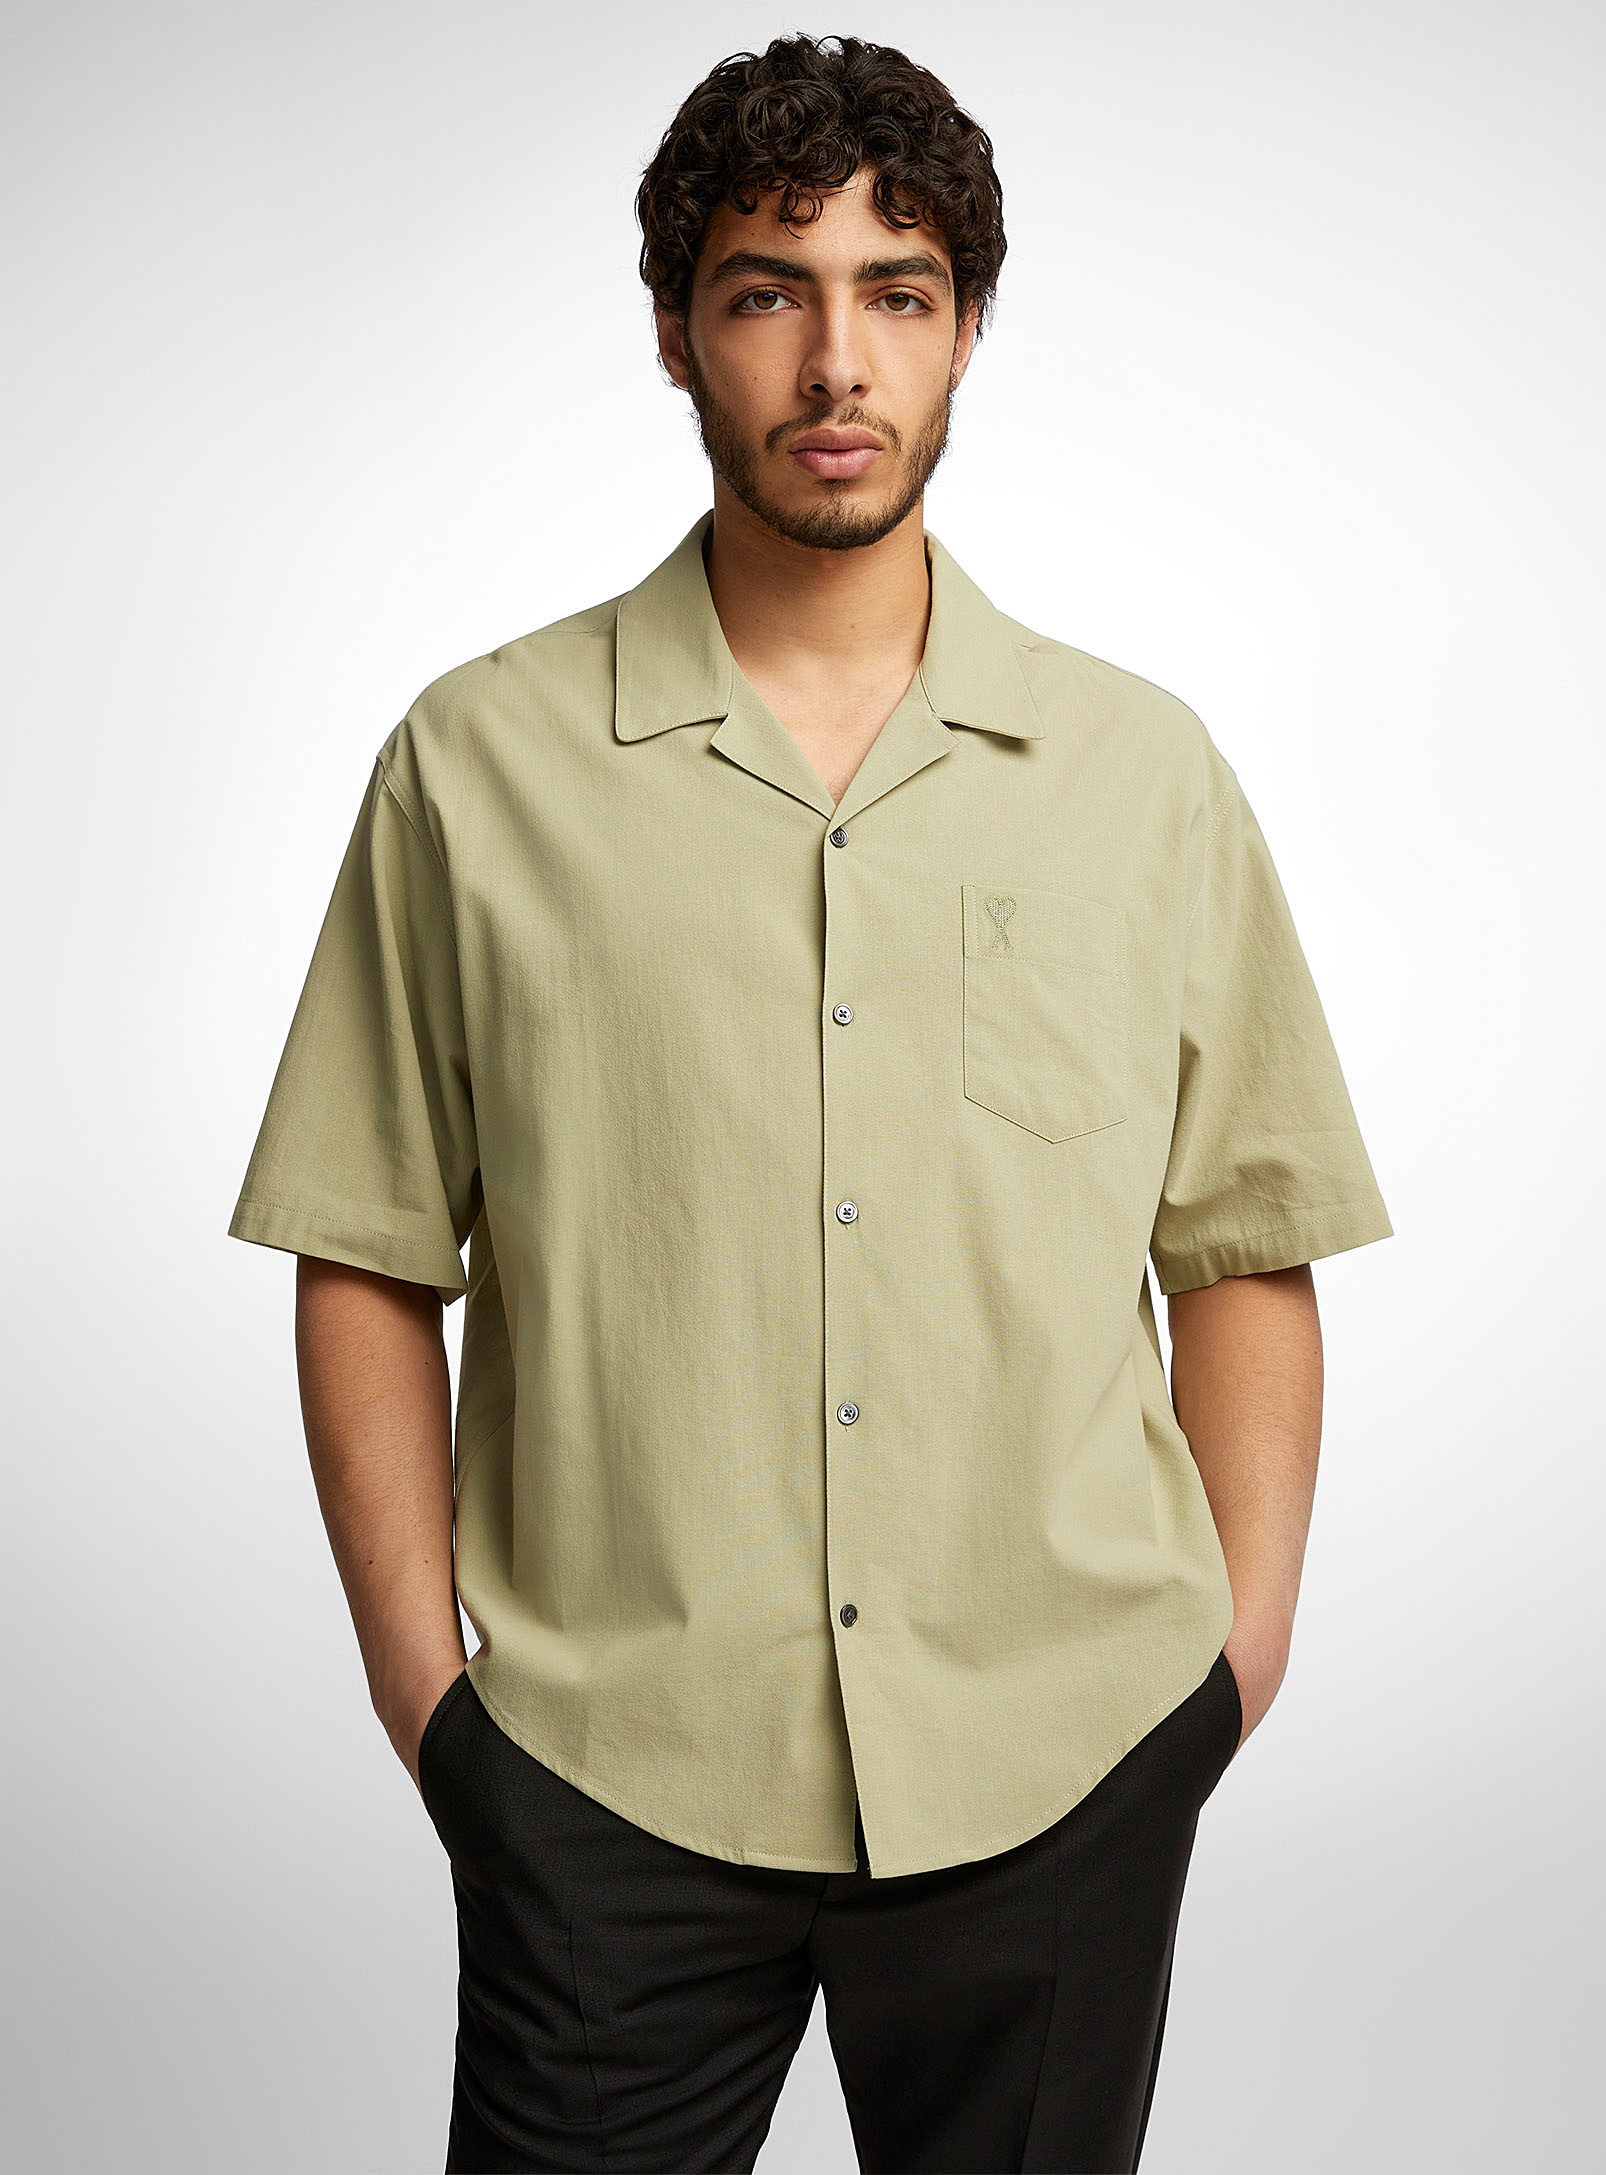 Ami Alexandre Mattiussi Embroidered Pocket Casual Shirt In Mossy Green